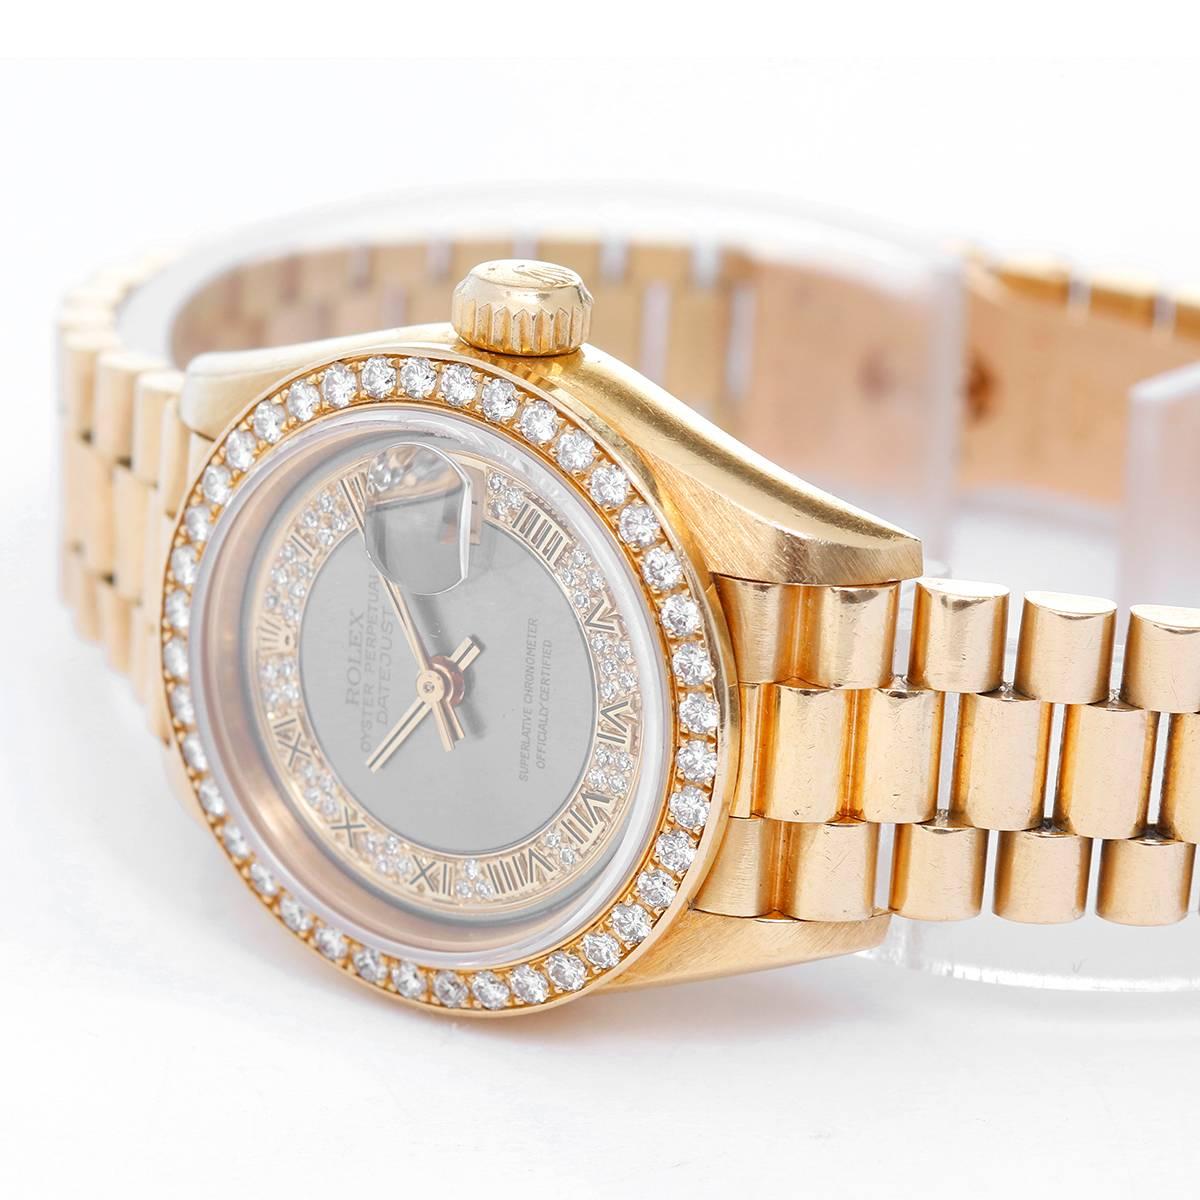 Rolex President Yellow Gold Diamond Bezel Ladies Watch -  Automatic. 18k Yellow Gold with Factory Diamond Bezel (26mm). Factory Gray Myriad Diamond Dial with Roman Numerals; Date at 3:00 o'clock. 18k Yellow Gold President hidden clasp bracelet.